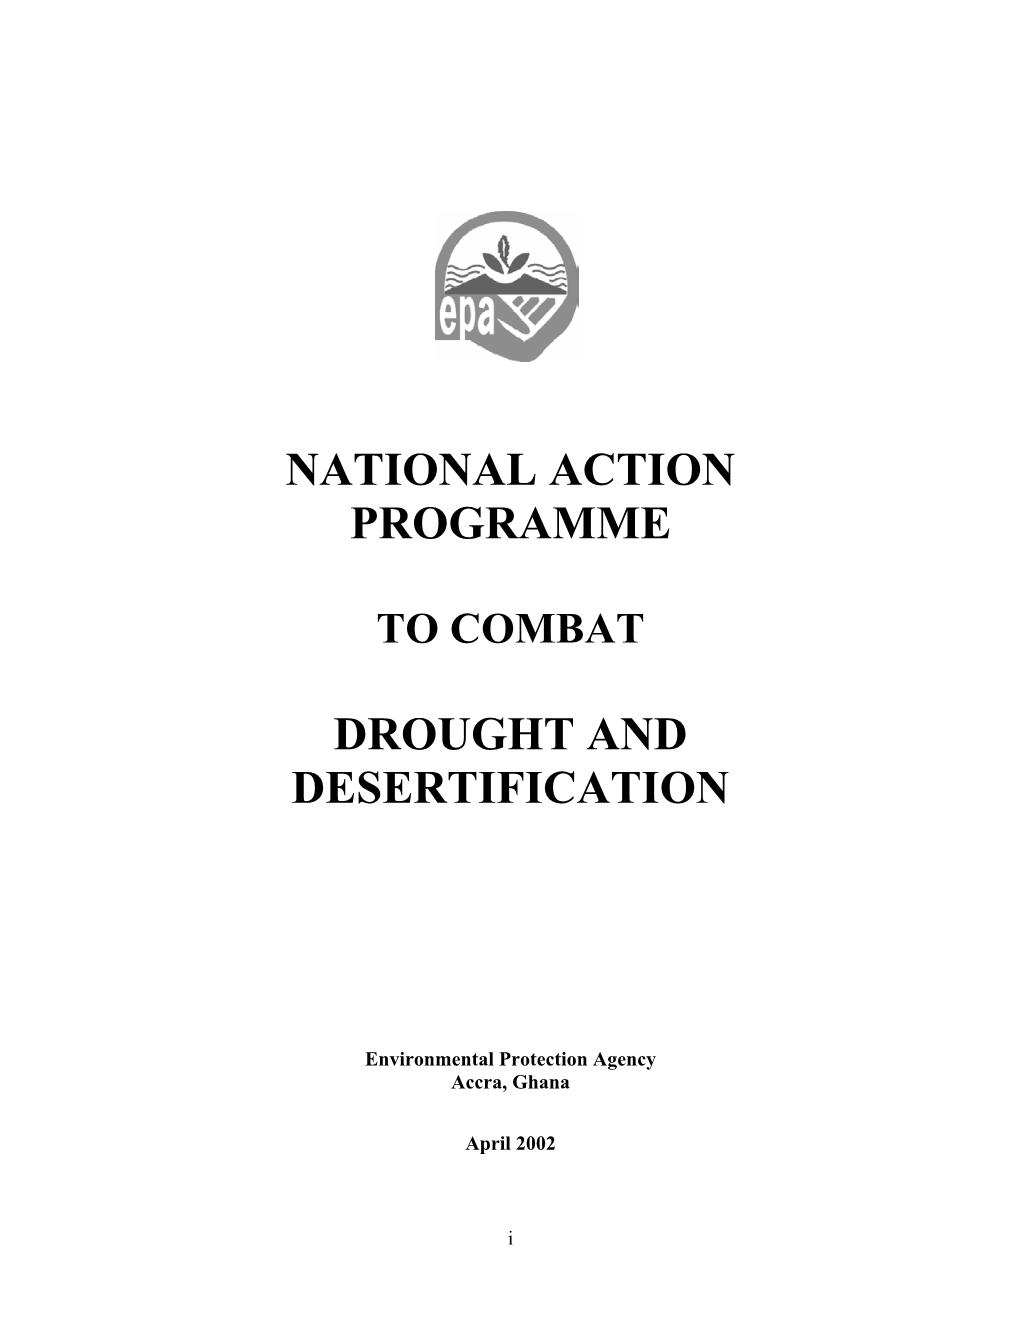 National Action Programme Drought and Desertification